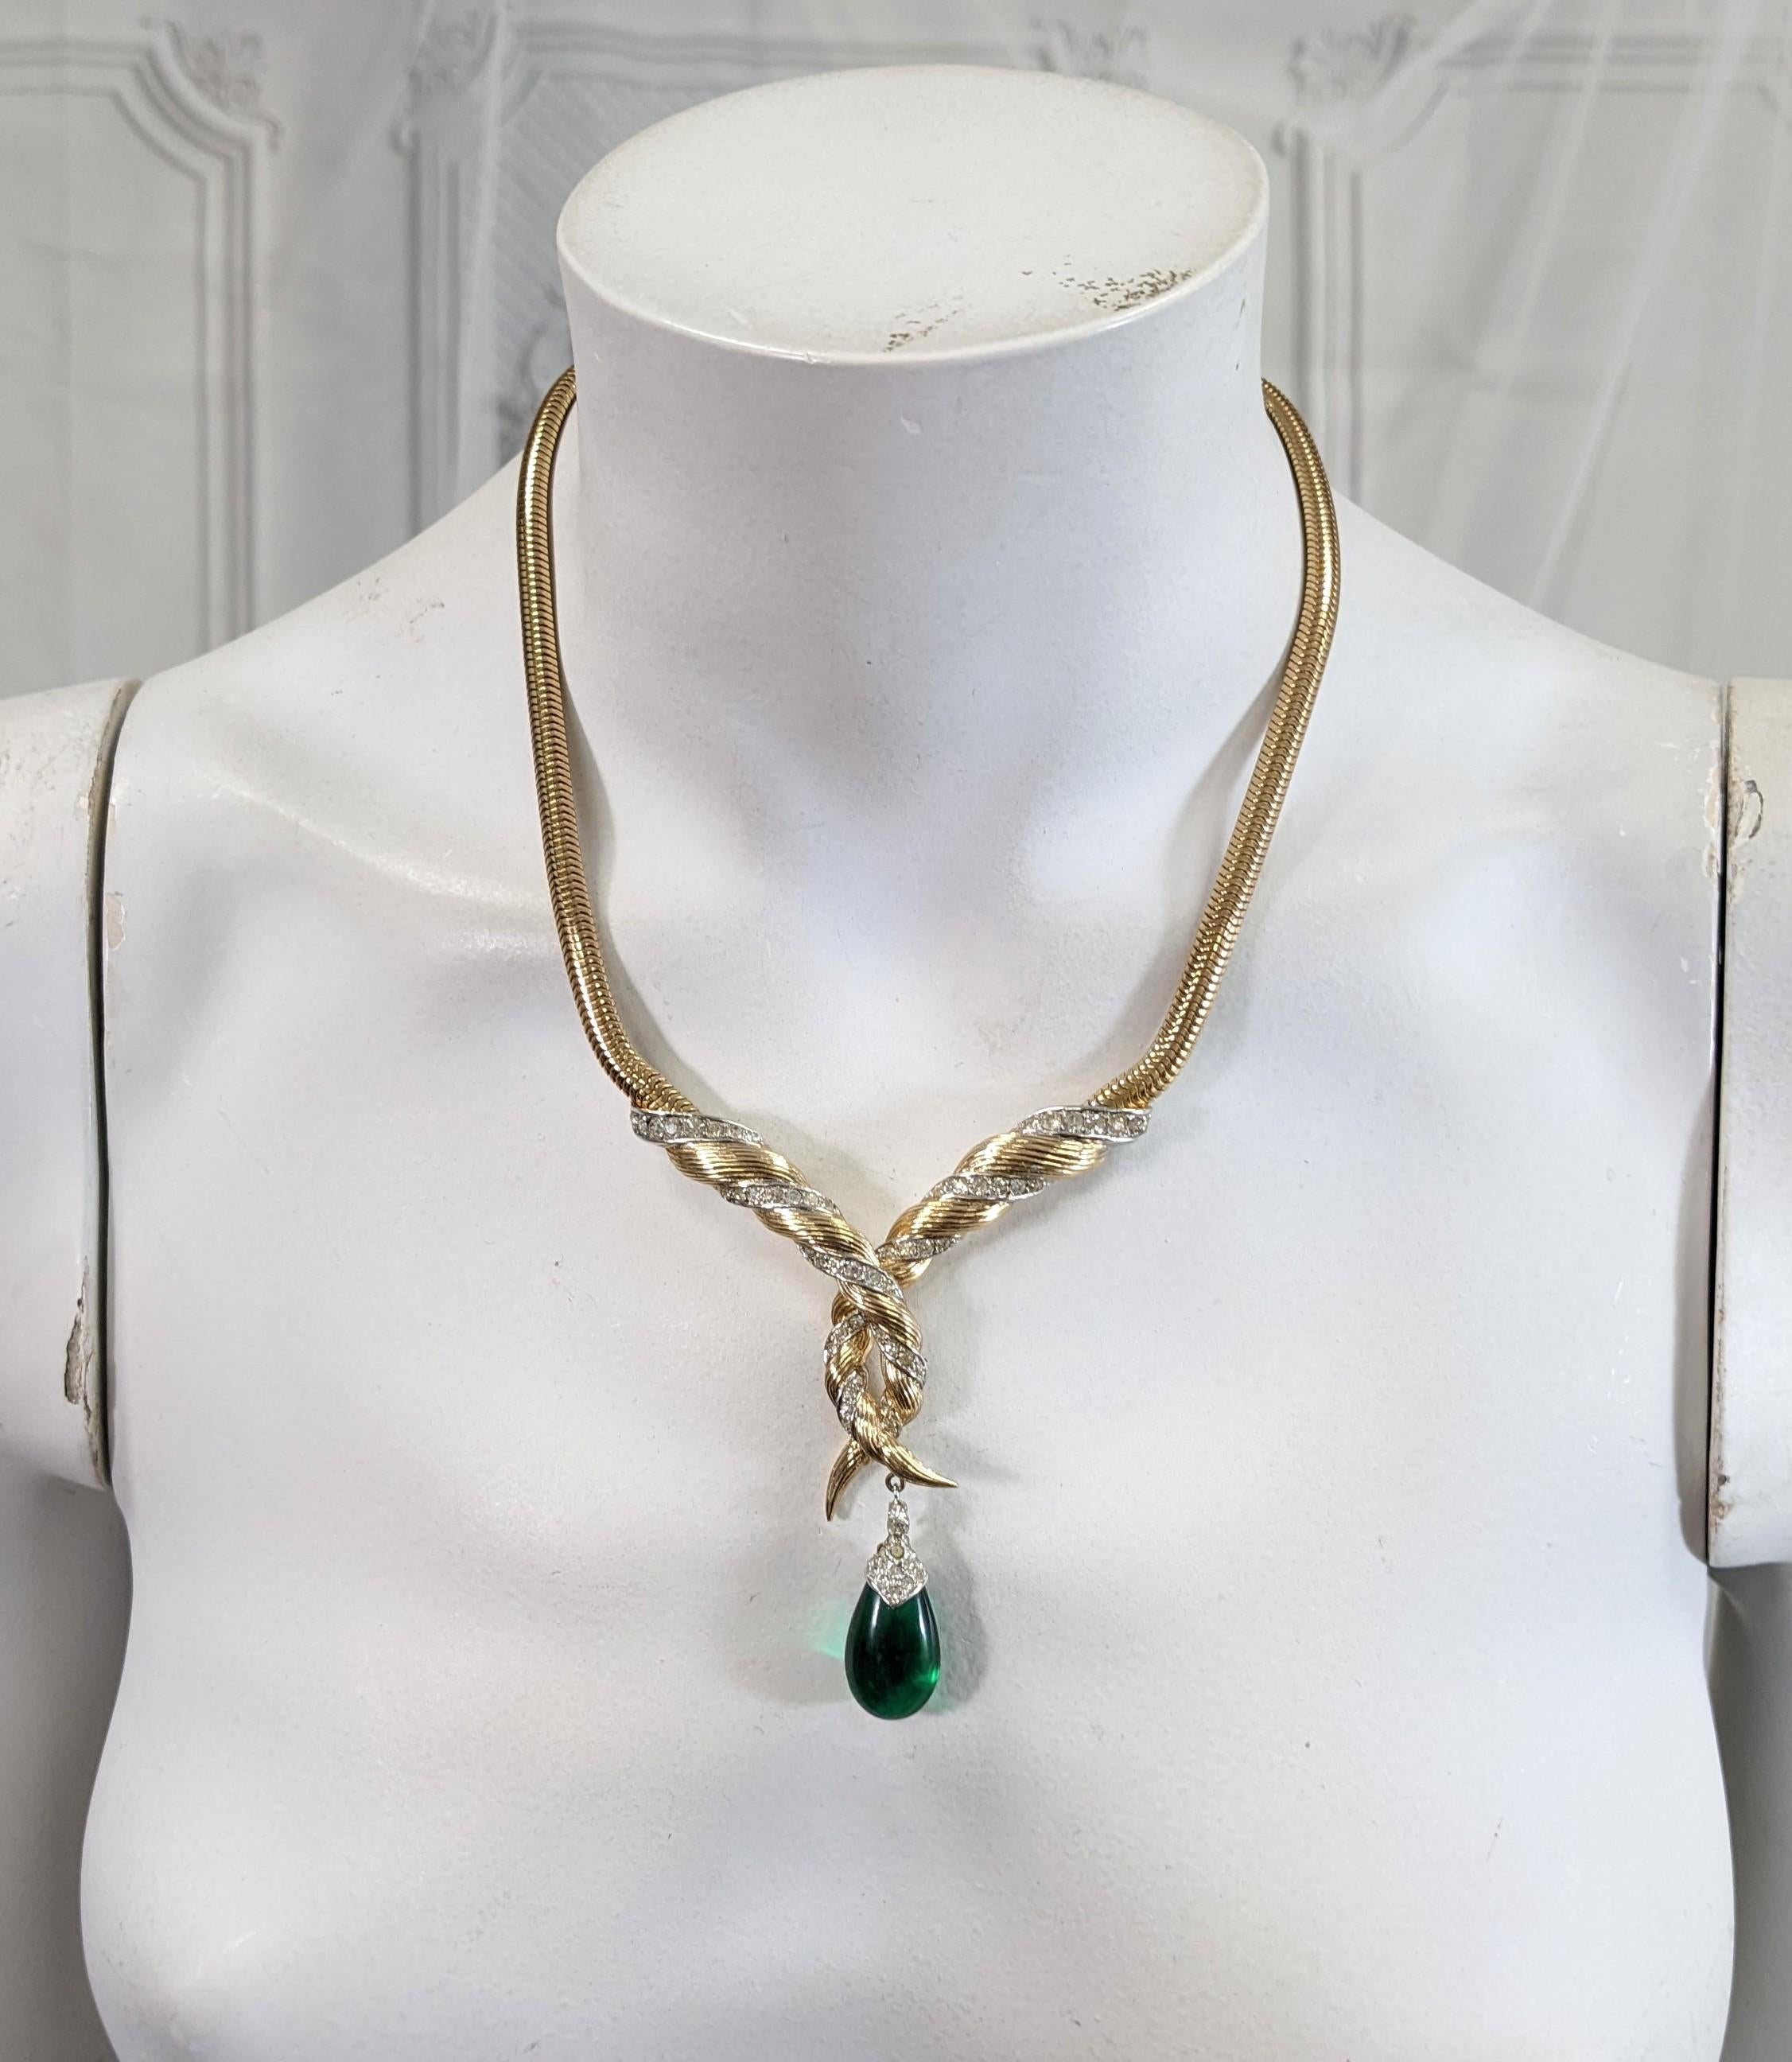 Women's or Men's Marcel Boucher Gilt Pave Emerald Drop Necklace and Earrings For Sale